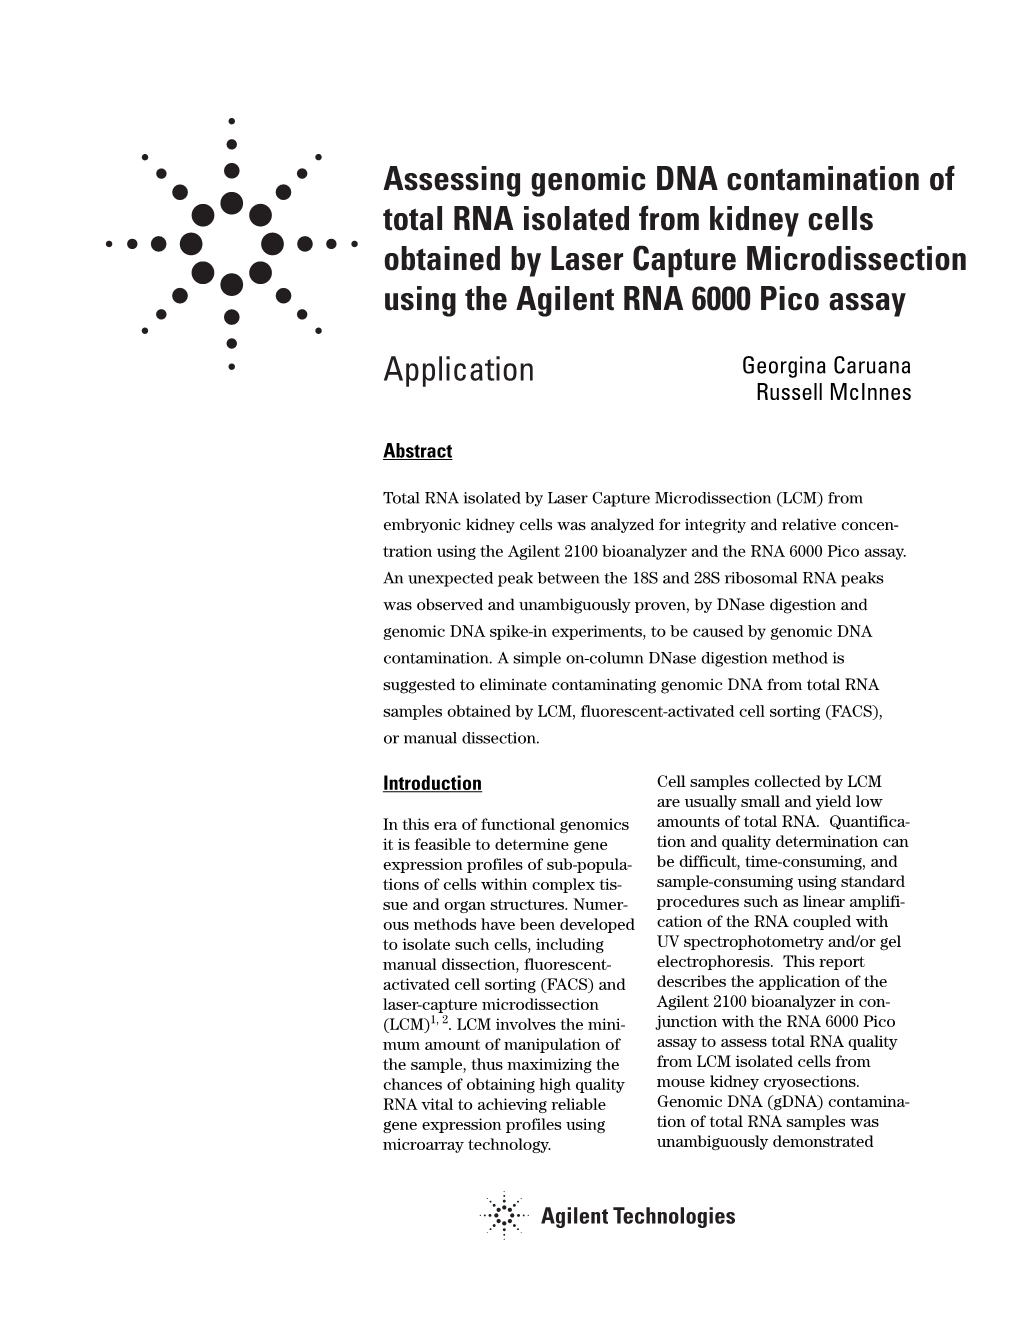 Assessing Genomic DNA Contamination of Total RNA Isolated from Kidney Cells Obtained by Laser Capture Microdissection Using the Agilent RNA 6000 Pico Assay